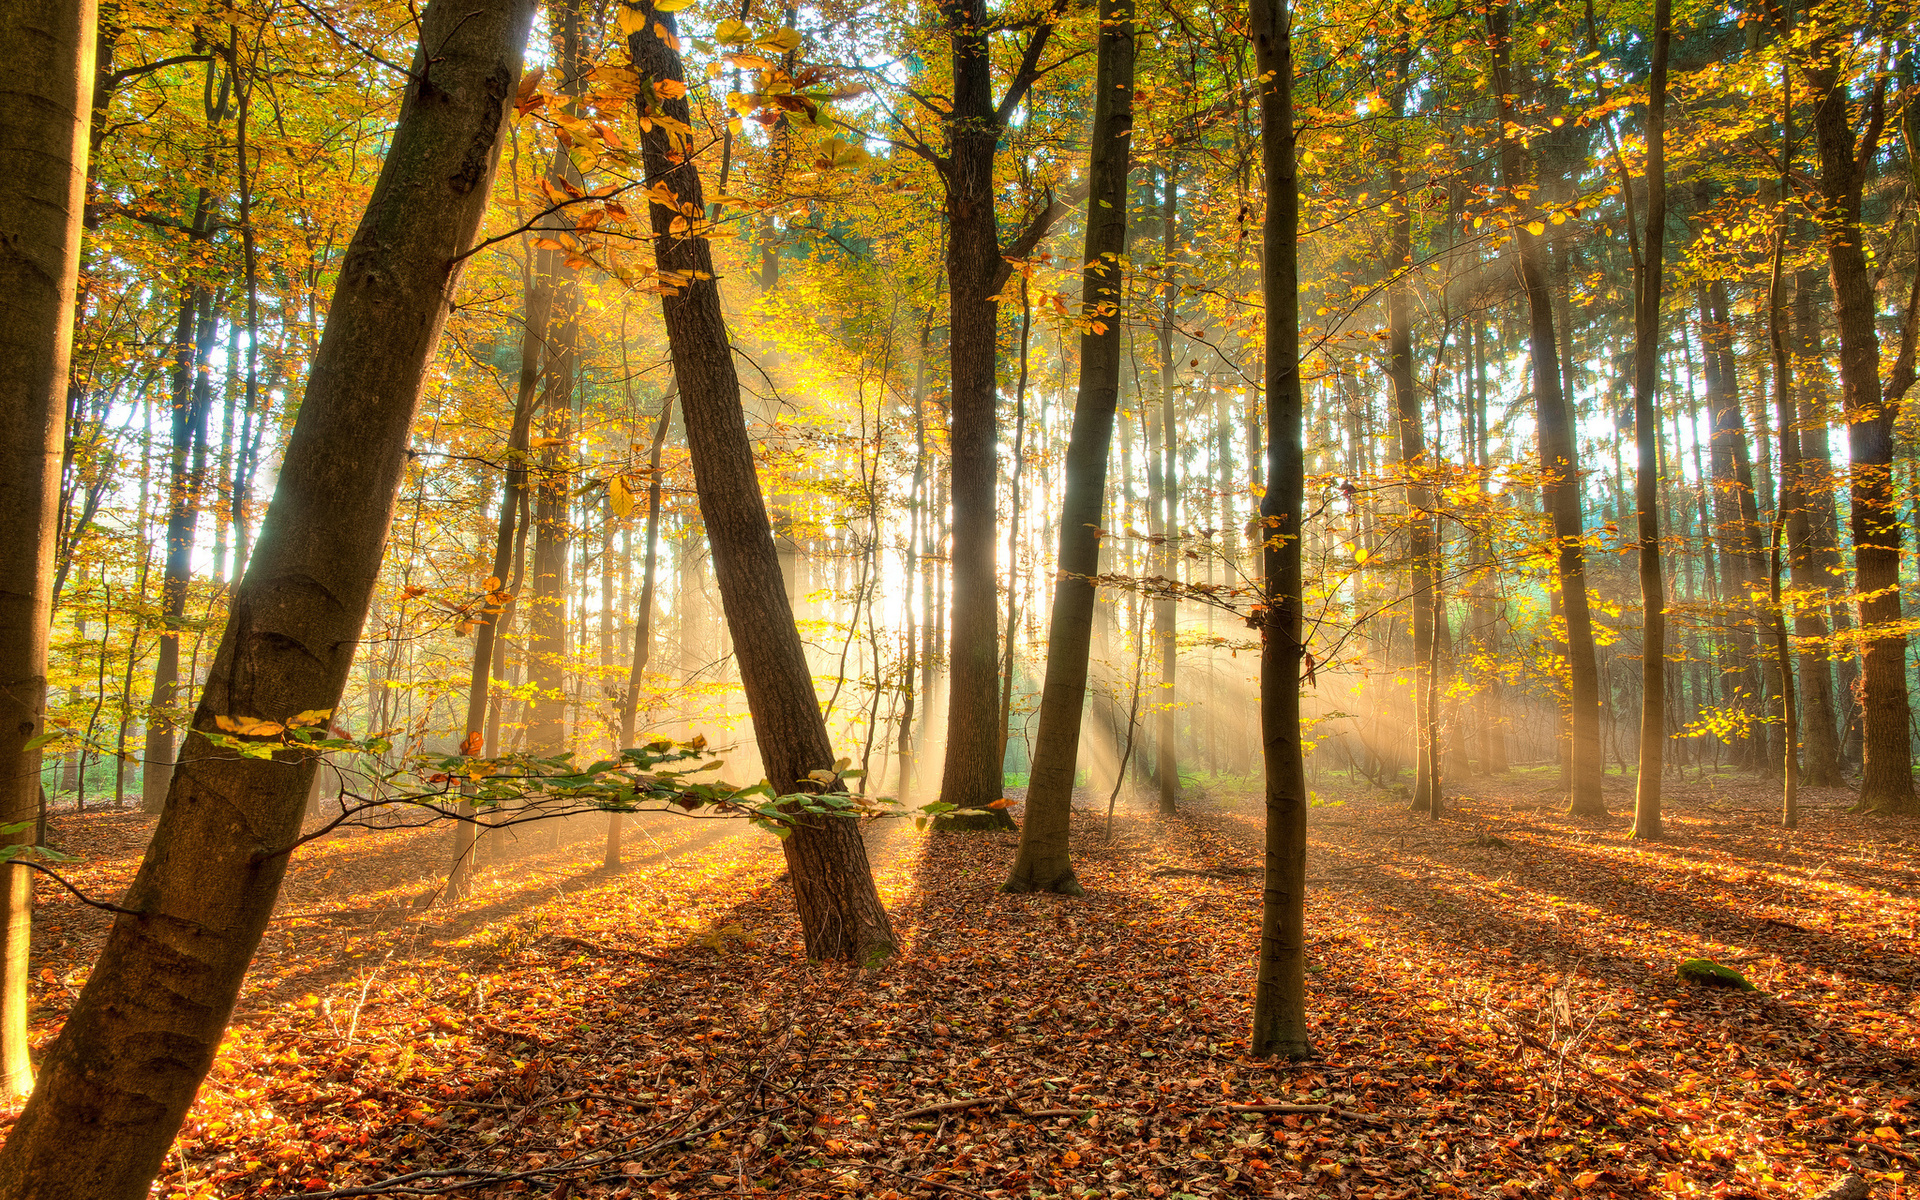 landscapes, Nature, Trees, Forest, Autumn, Fall, Seasons, Leaves, Sunlight, Sunbeams Wallpaper